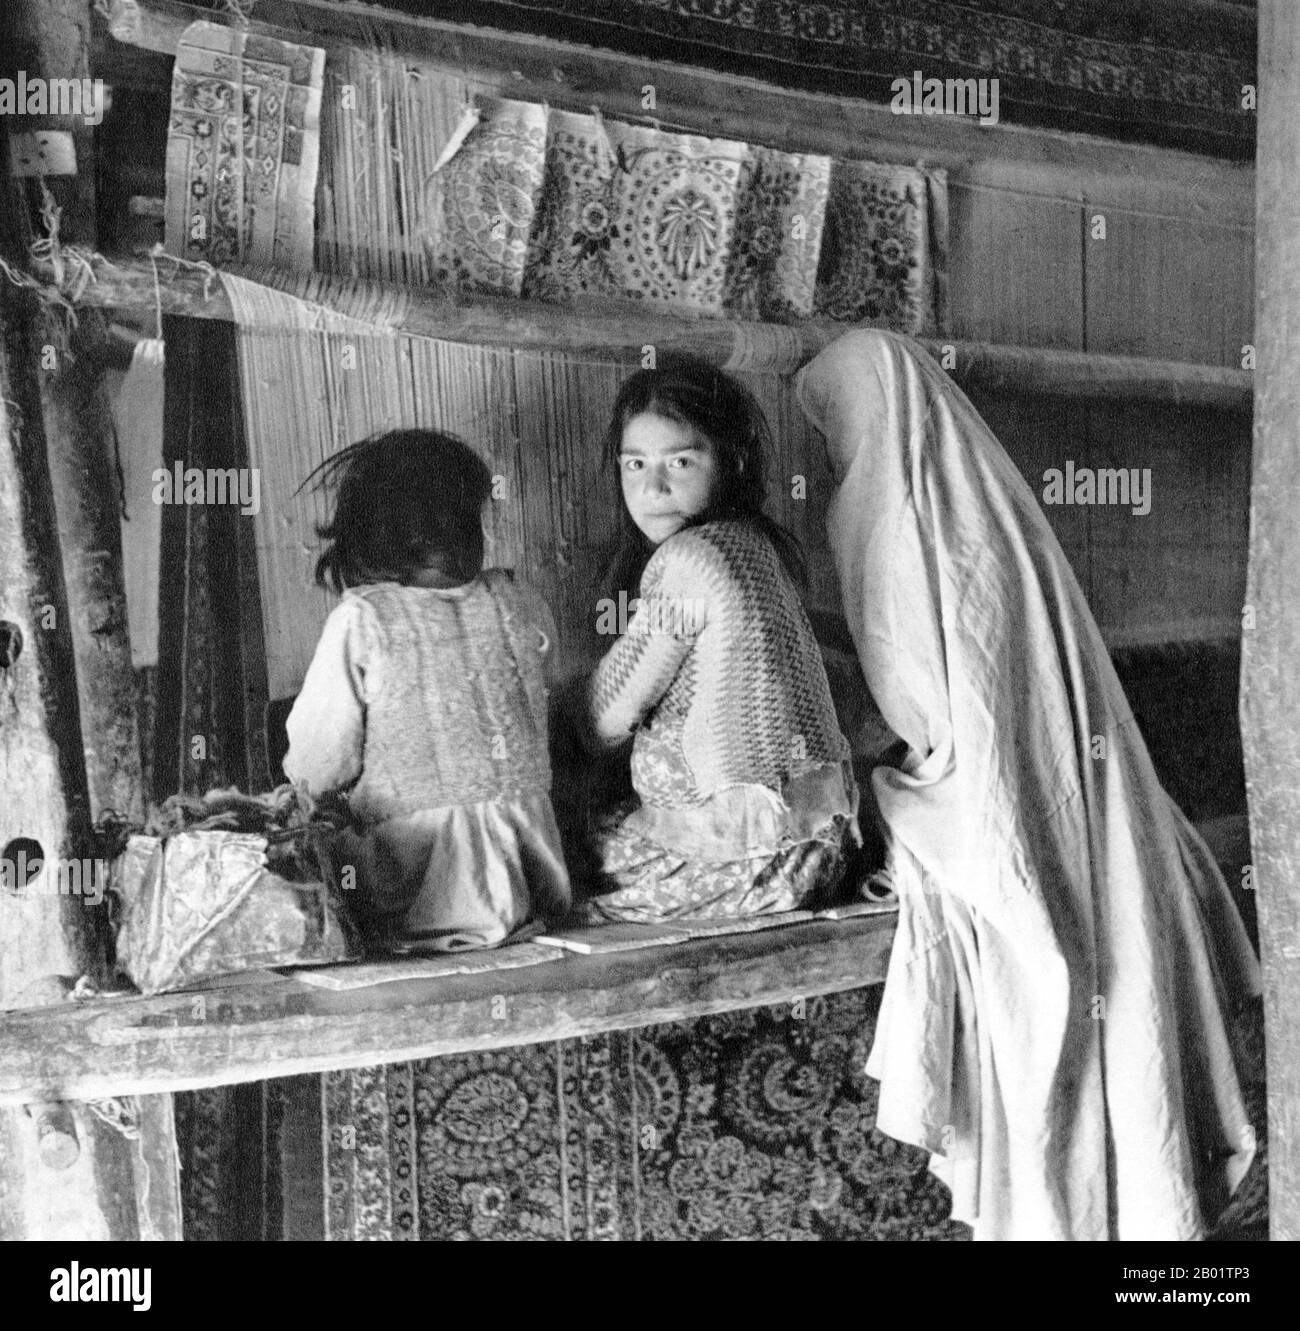 Iran/Persia: Rug-weaving woman with two young girls, Hamadan, c. 1920.  Hamadān or Hamedān (Old Persian: Hagmatana, Ancient Greek: Ecbatana) is the capital city of Hamadan Province of Iran. At the 2006 census, its population was 473,149, in 127,812 families.  Hamedan is believed to be among the oldest Iranian cities and one of the oldest in the world. It is possible that it was occupied by the Assyrians in 1100 BCE; the Ancient Greek historian, Herodotus, states that it was the capital of the Medes, around 700 BCE. Stock Photo